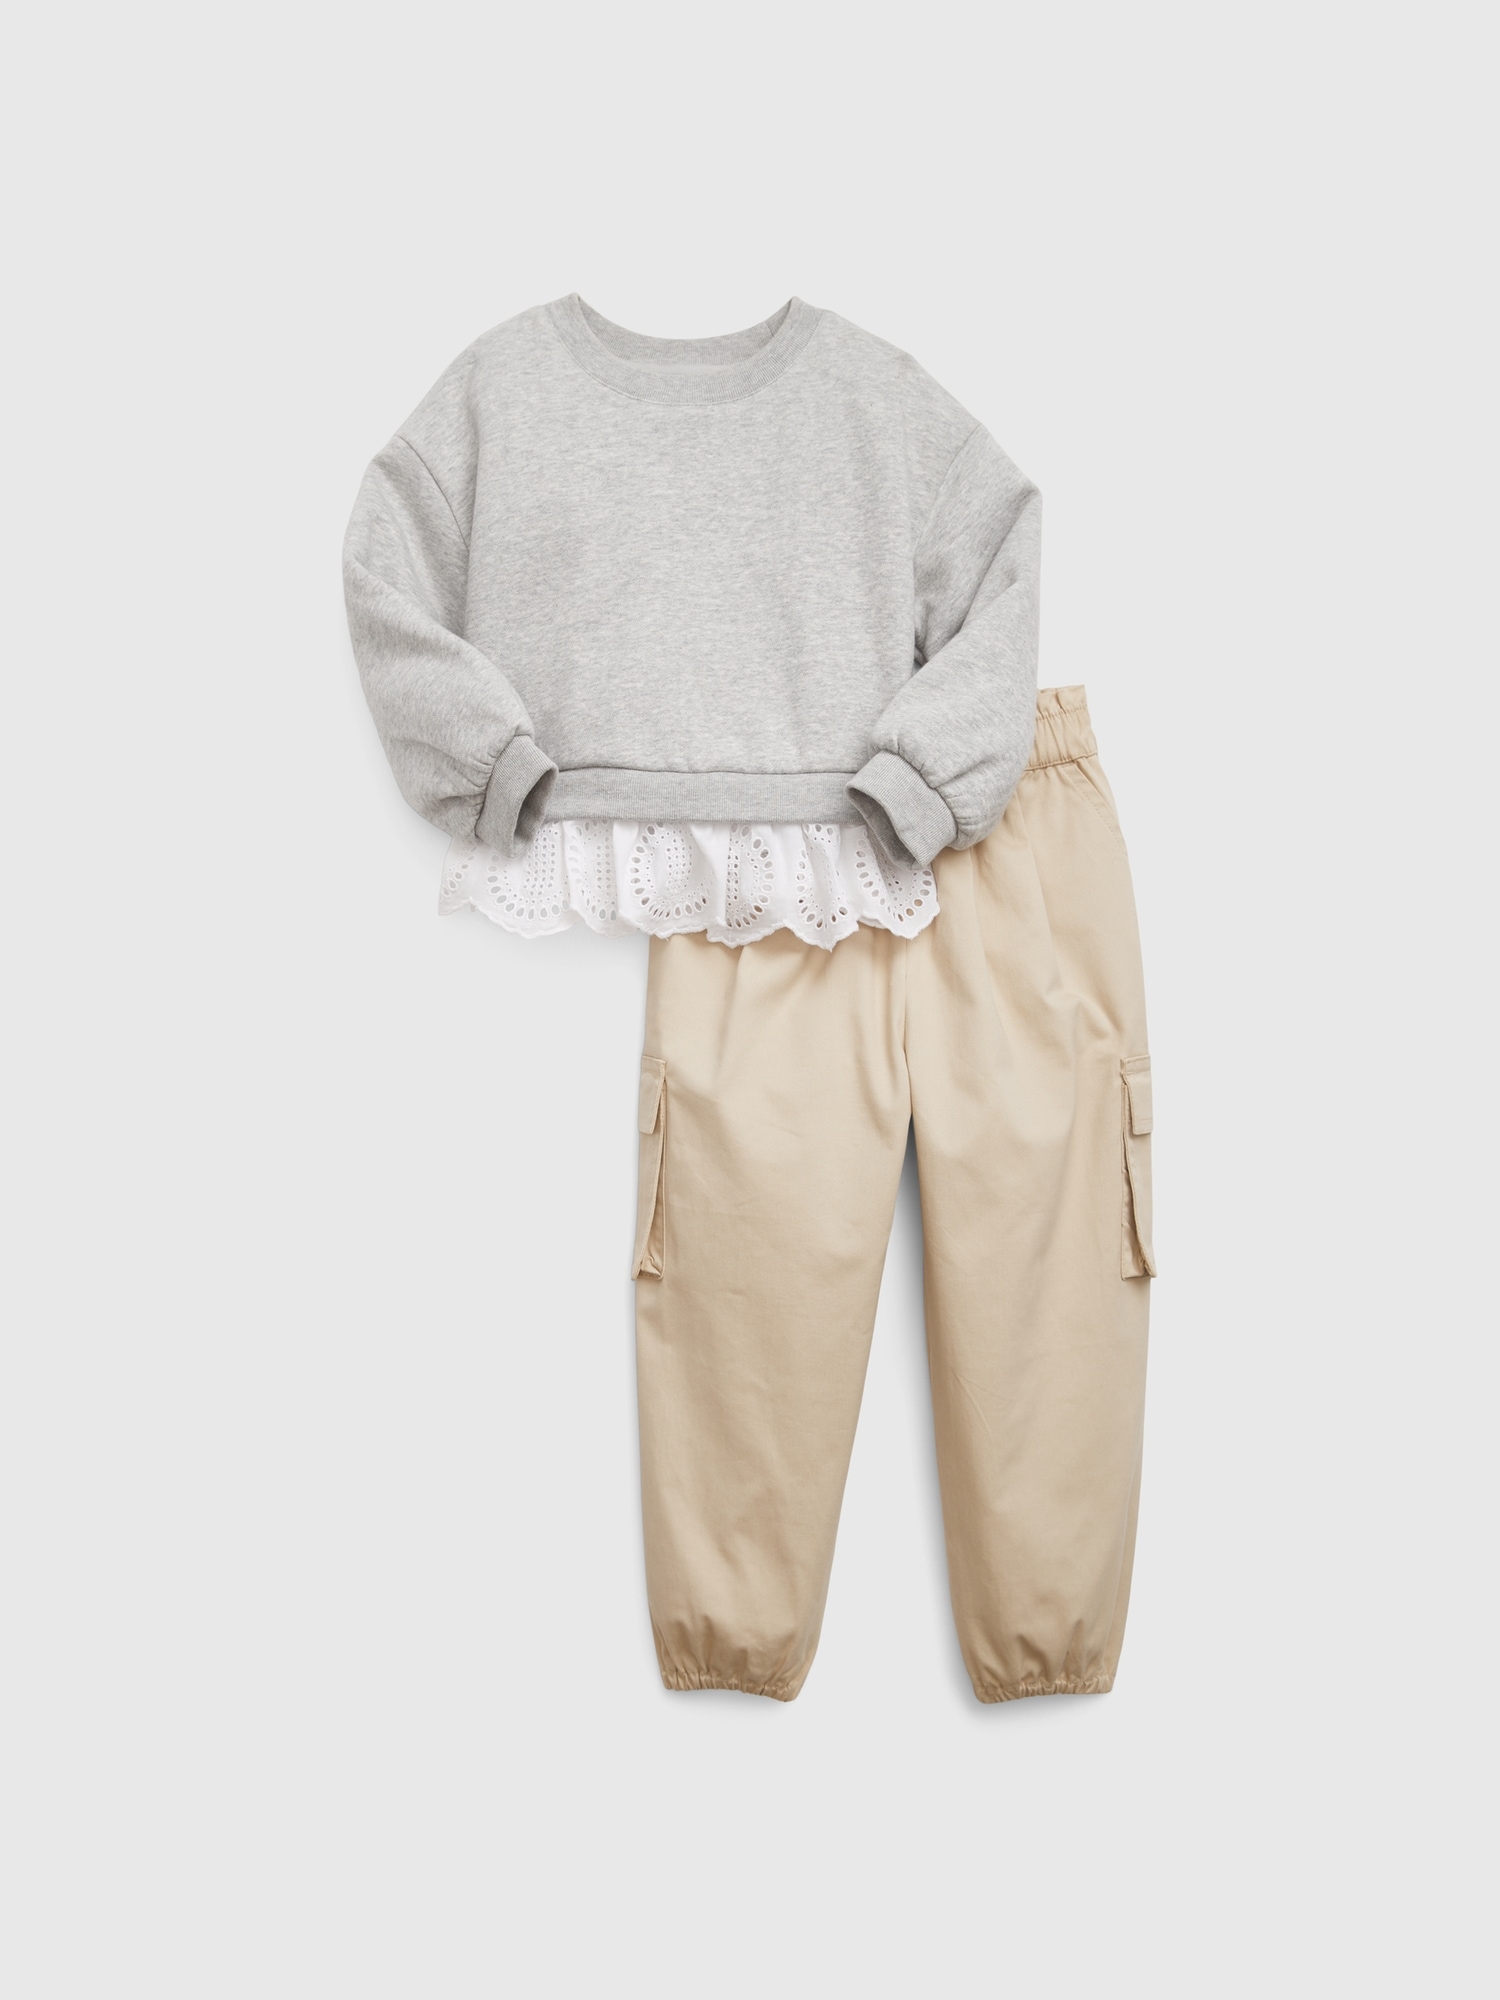 Toddler Two-Piece Outfit Set